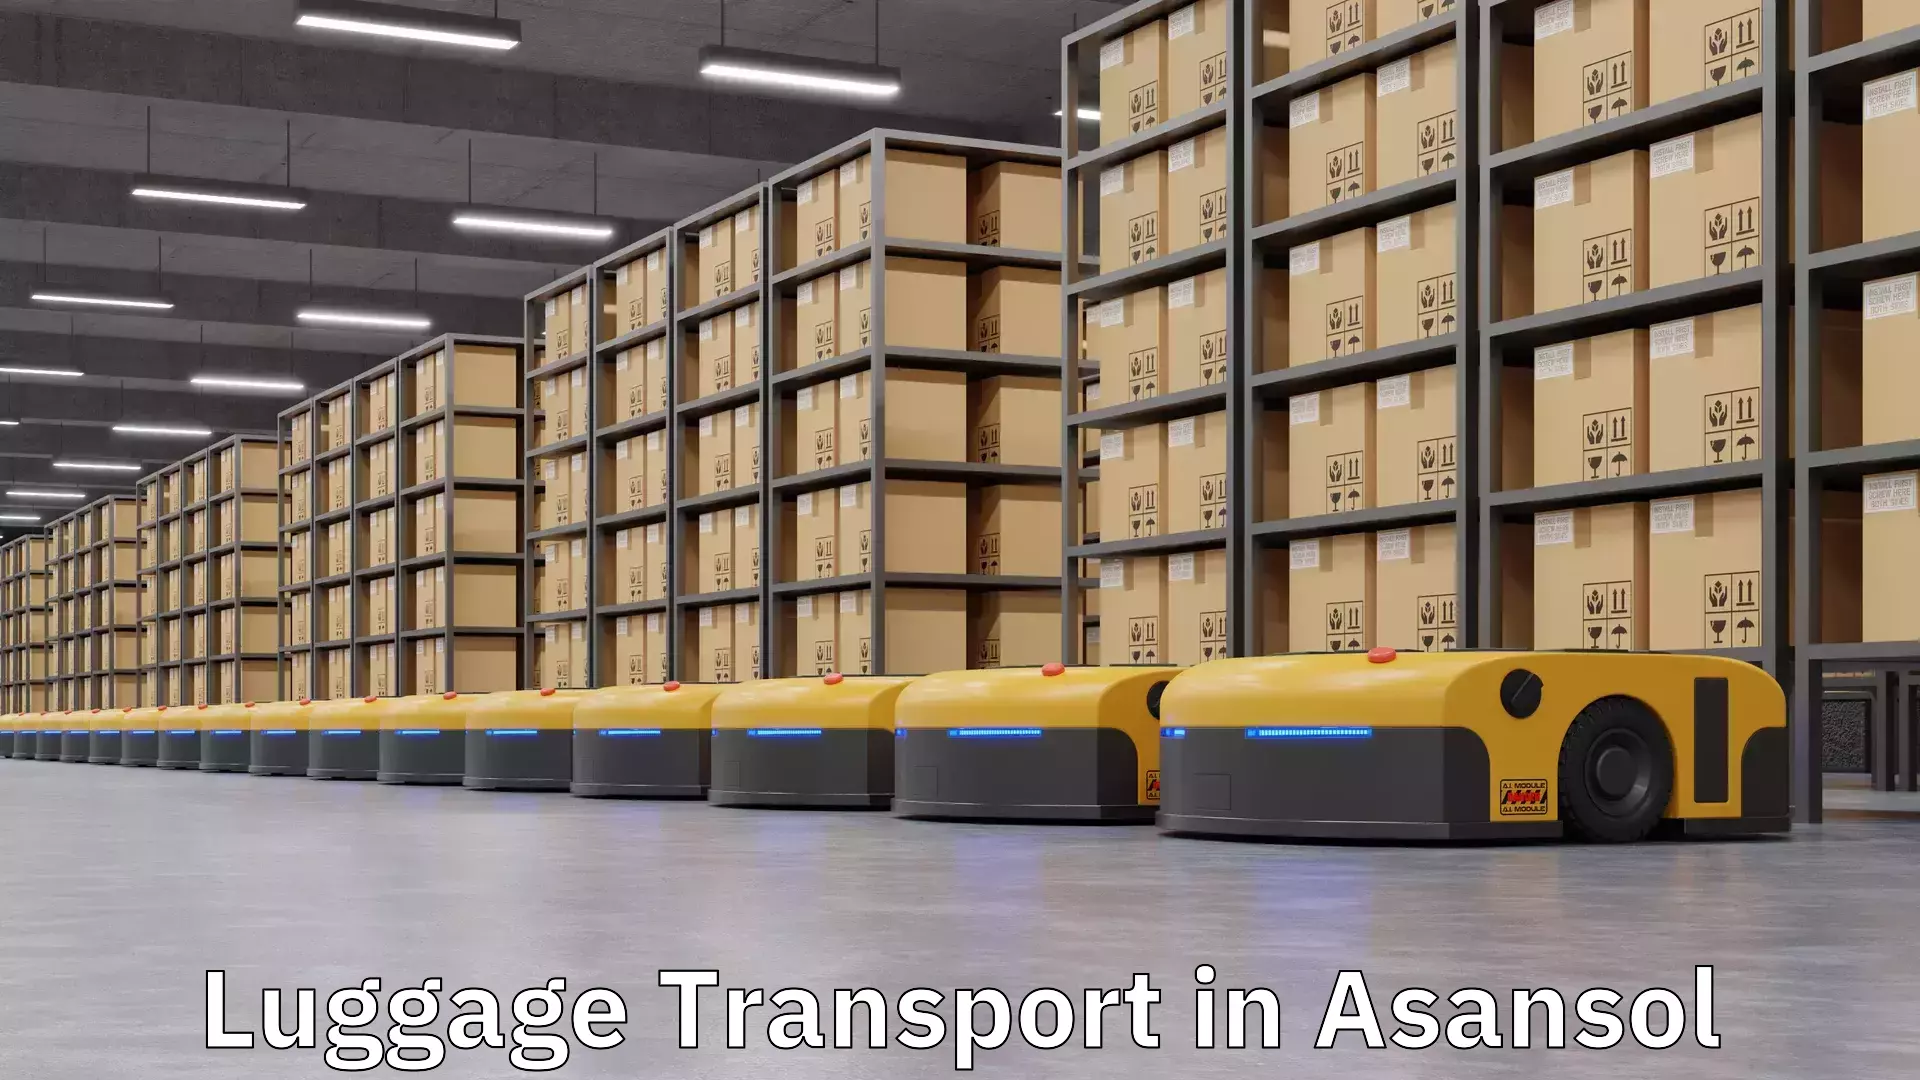 Luggage transport deals in Asansol